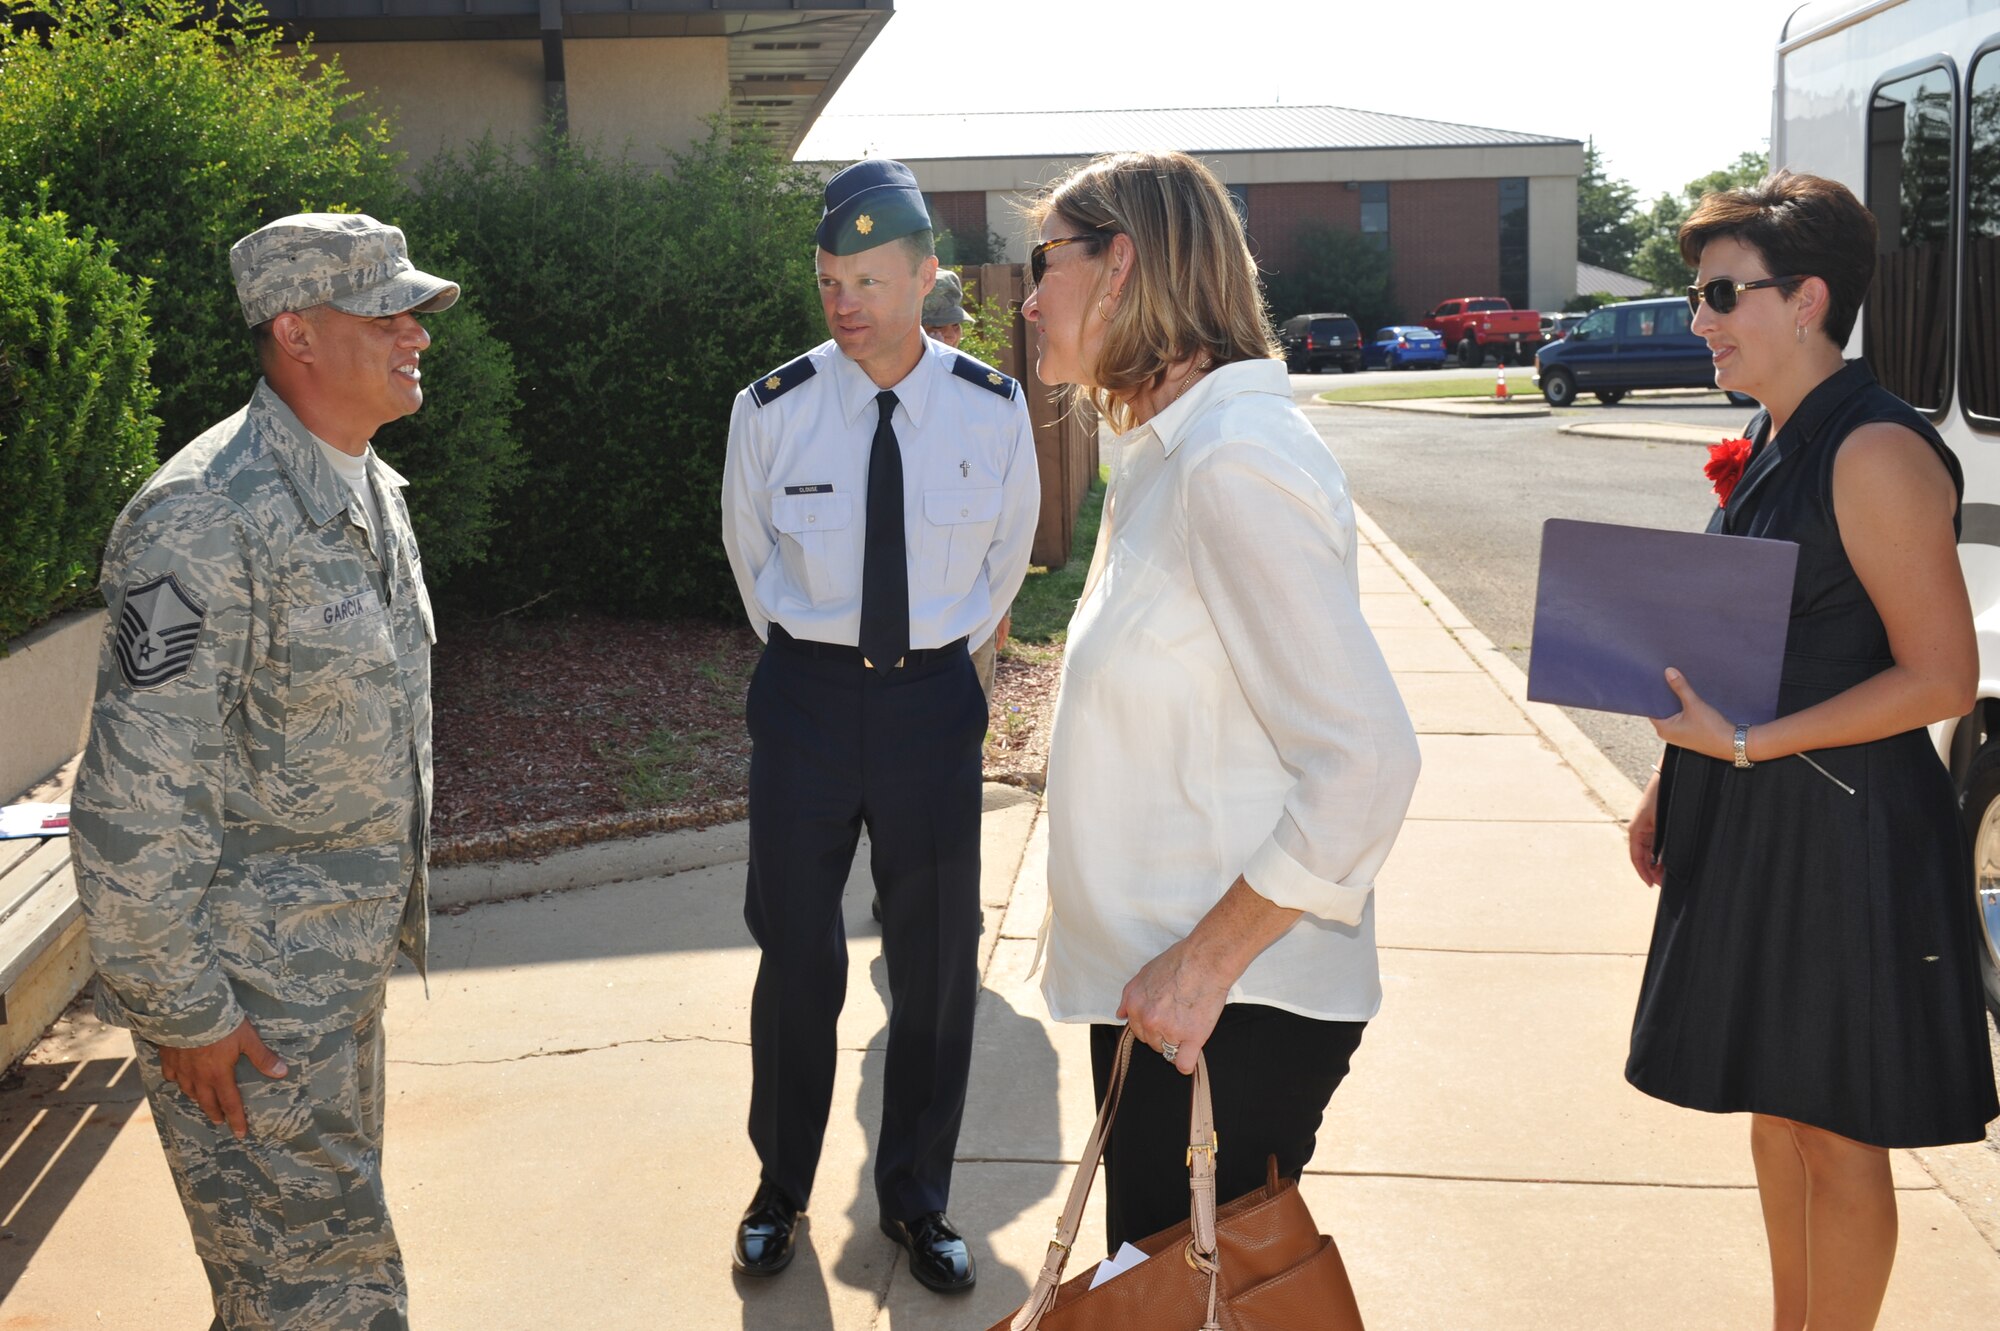 ALTUS AIR FORCE BASE, Okla. – U.S. Air Force Master Sgt. Jason Garcia, 97th Air Mobility Wing Chapel assistant, and U.S. Air Force Maj. Bryan Clouse, 97th Air Mobility Wing chaplain, greet Mrs. Kim Rand, spouse of Gen. Robin Rand, commander of Air Education and Training Command, and Mrs. Alisa Spangenthal, spouse of the 97th AMW commander, at the Airmen Resiliency Center during Rand’s tour Aug. 7, 2014. Clouse and Garcia informed Rand of some of the great things that the ARC is doing for Airmen including the Airmen’s Pantry and Airmen’s Attic. (U.S. Air Force photo by Airman 1st Class J. Zuriel Lee/Released)